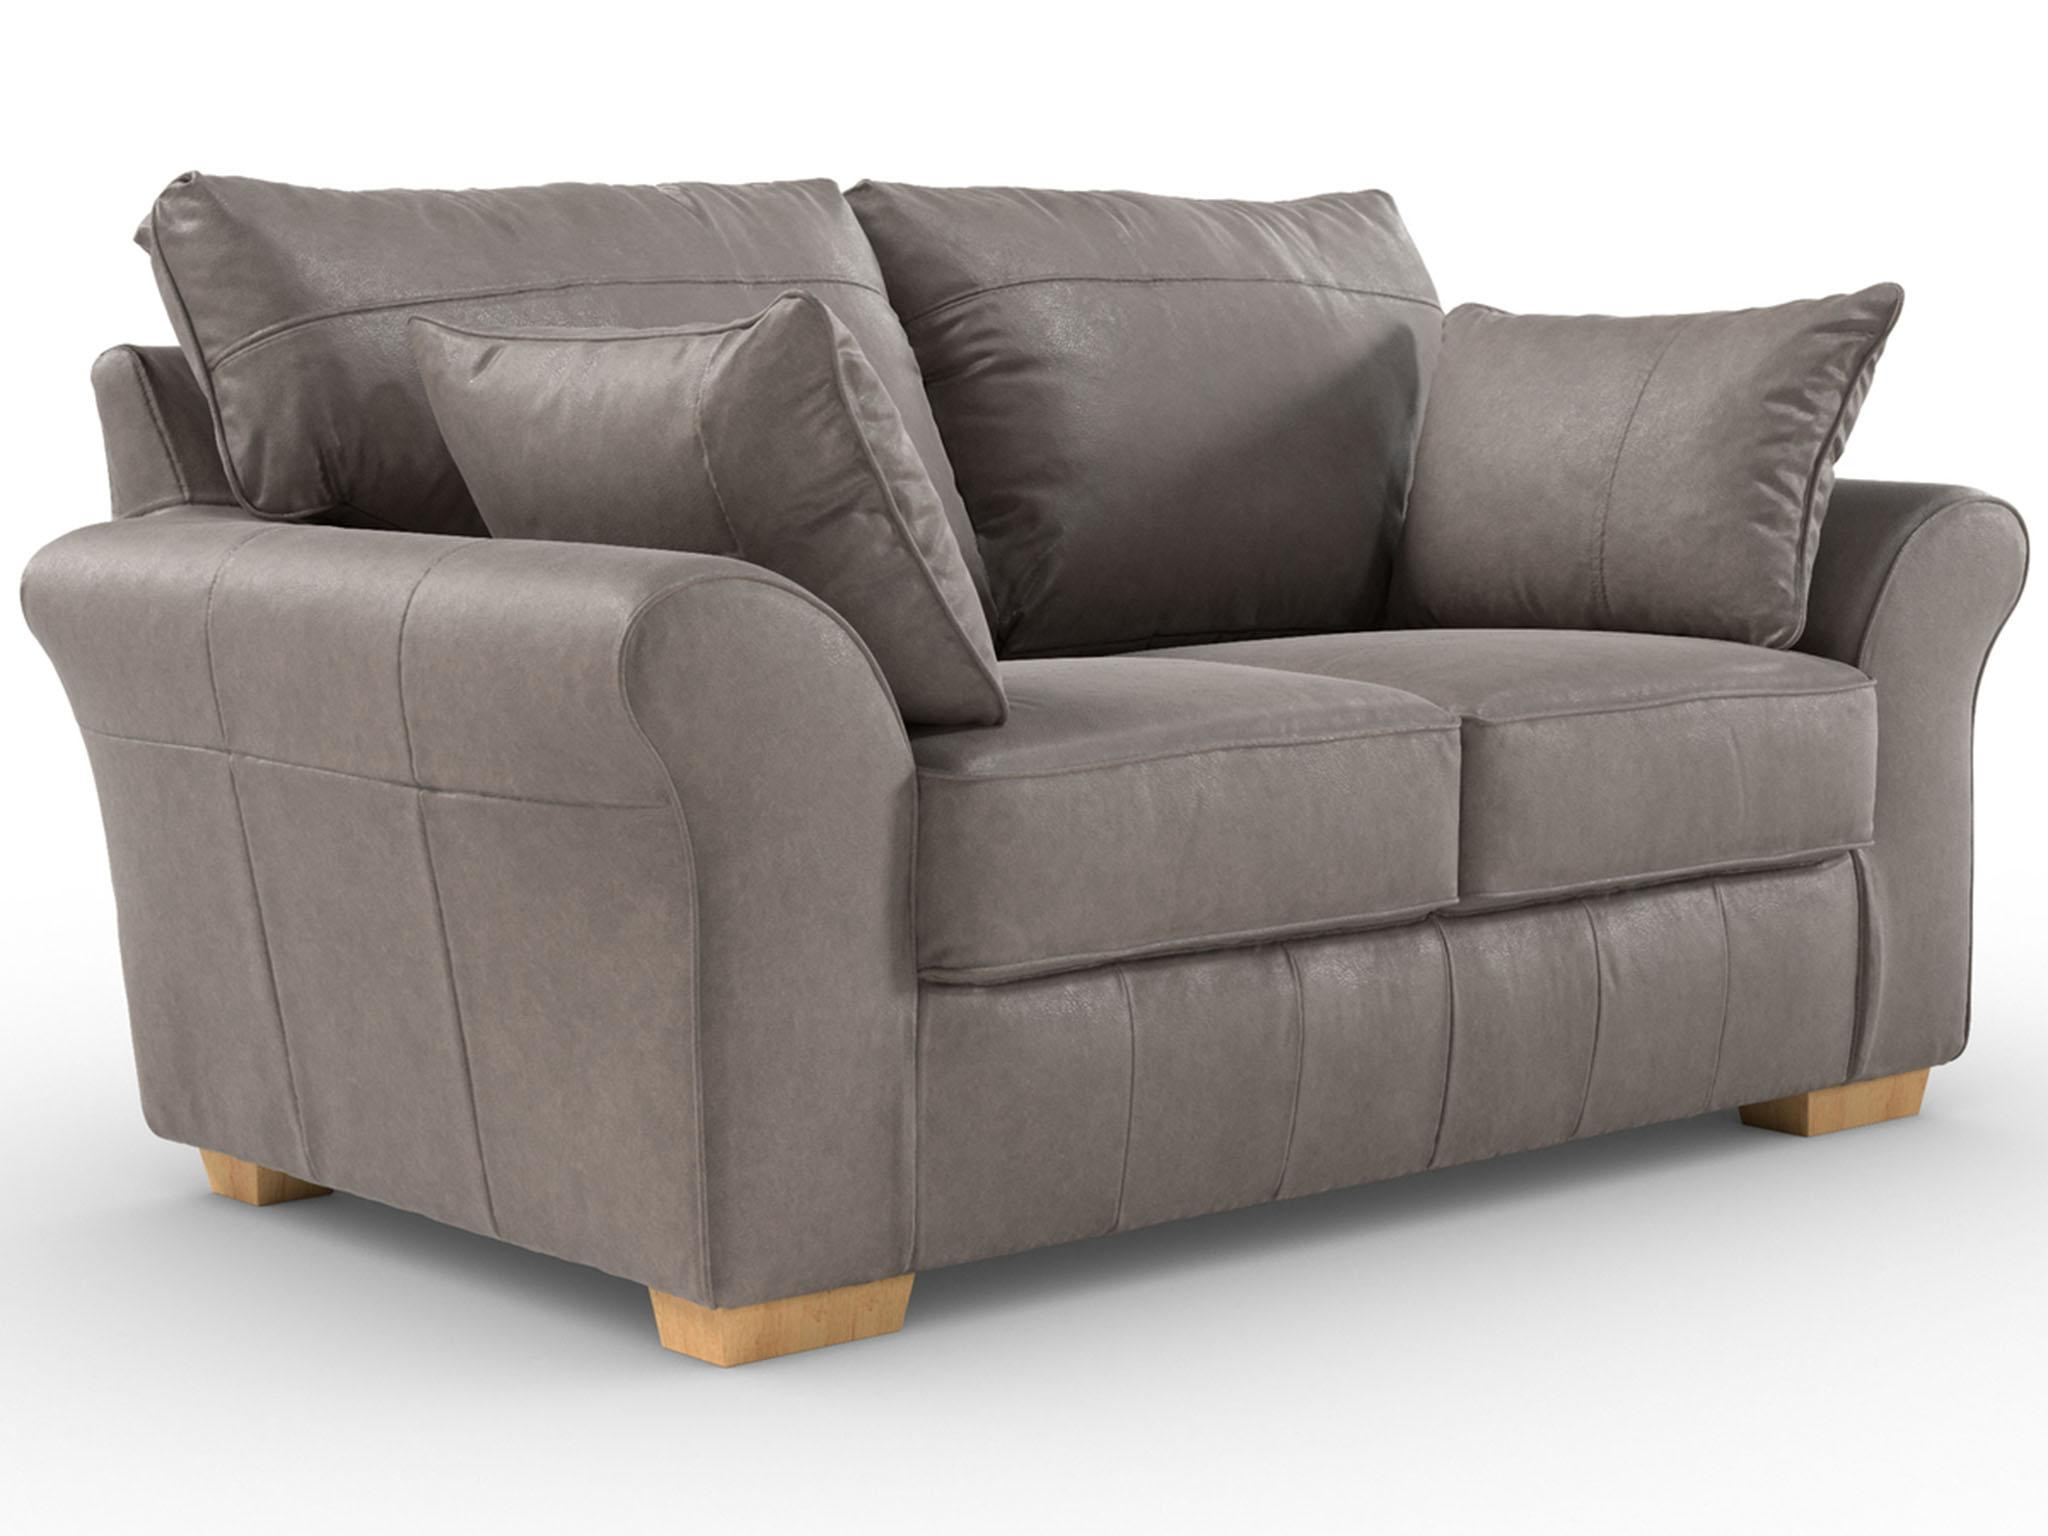 best leather sofa beds